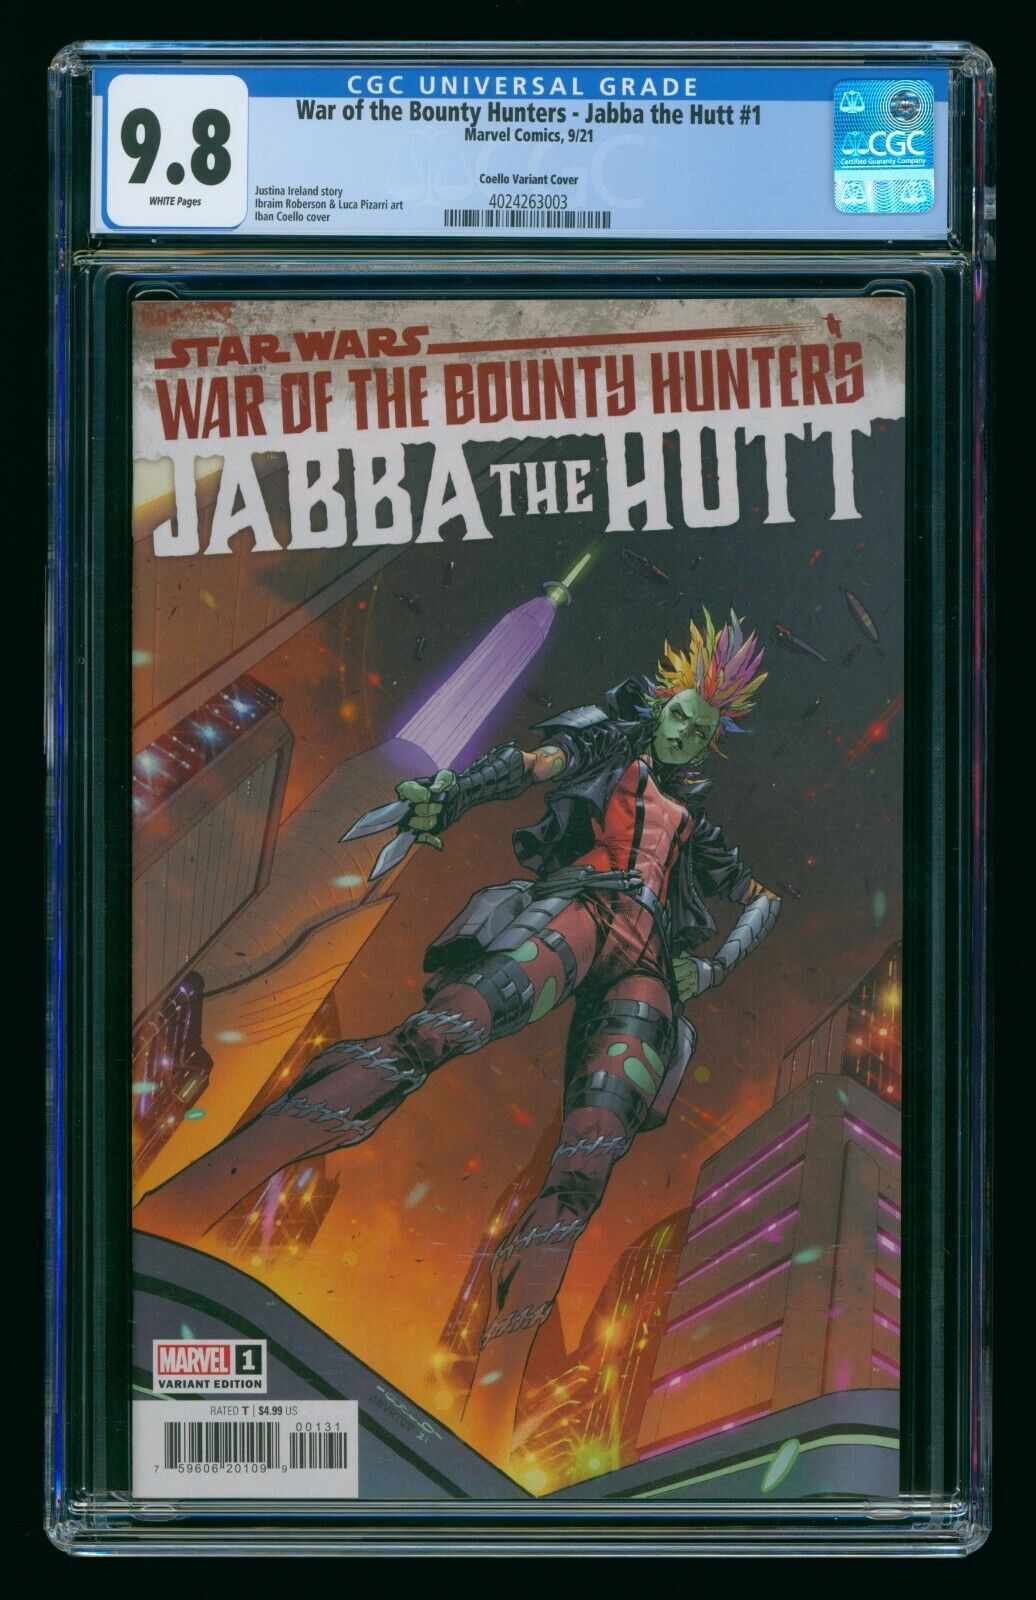 WAR OF THE BOUNTY HUNTERS JABBA THE HUTT #1 2021 CGC 9.8 VARIANT COELLE